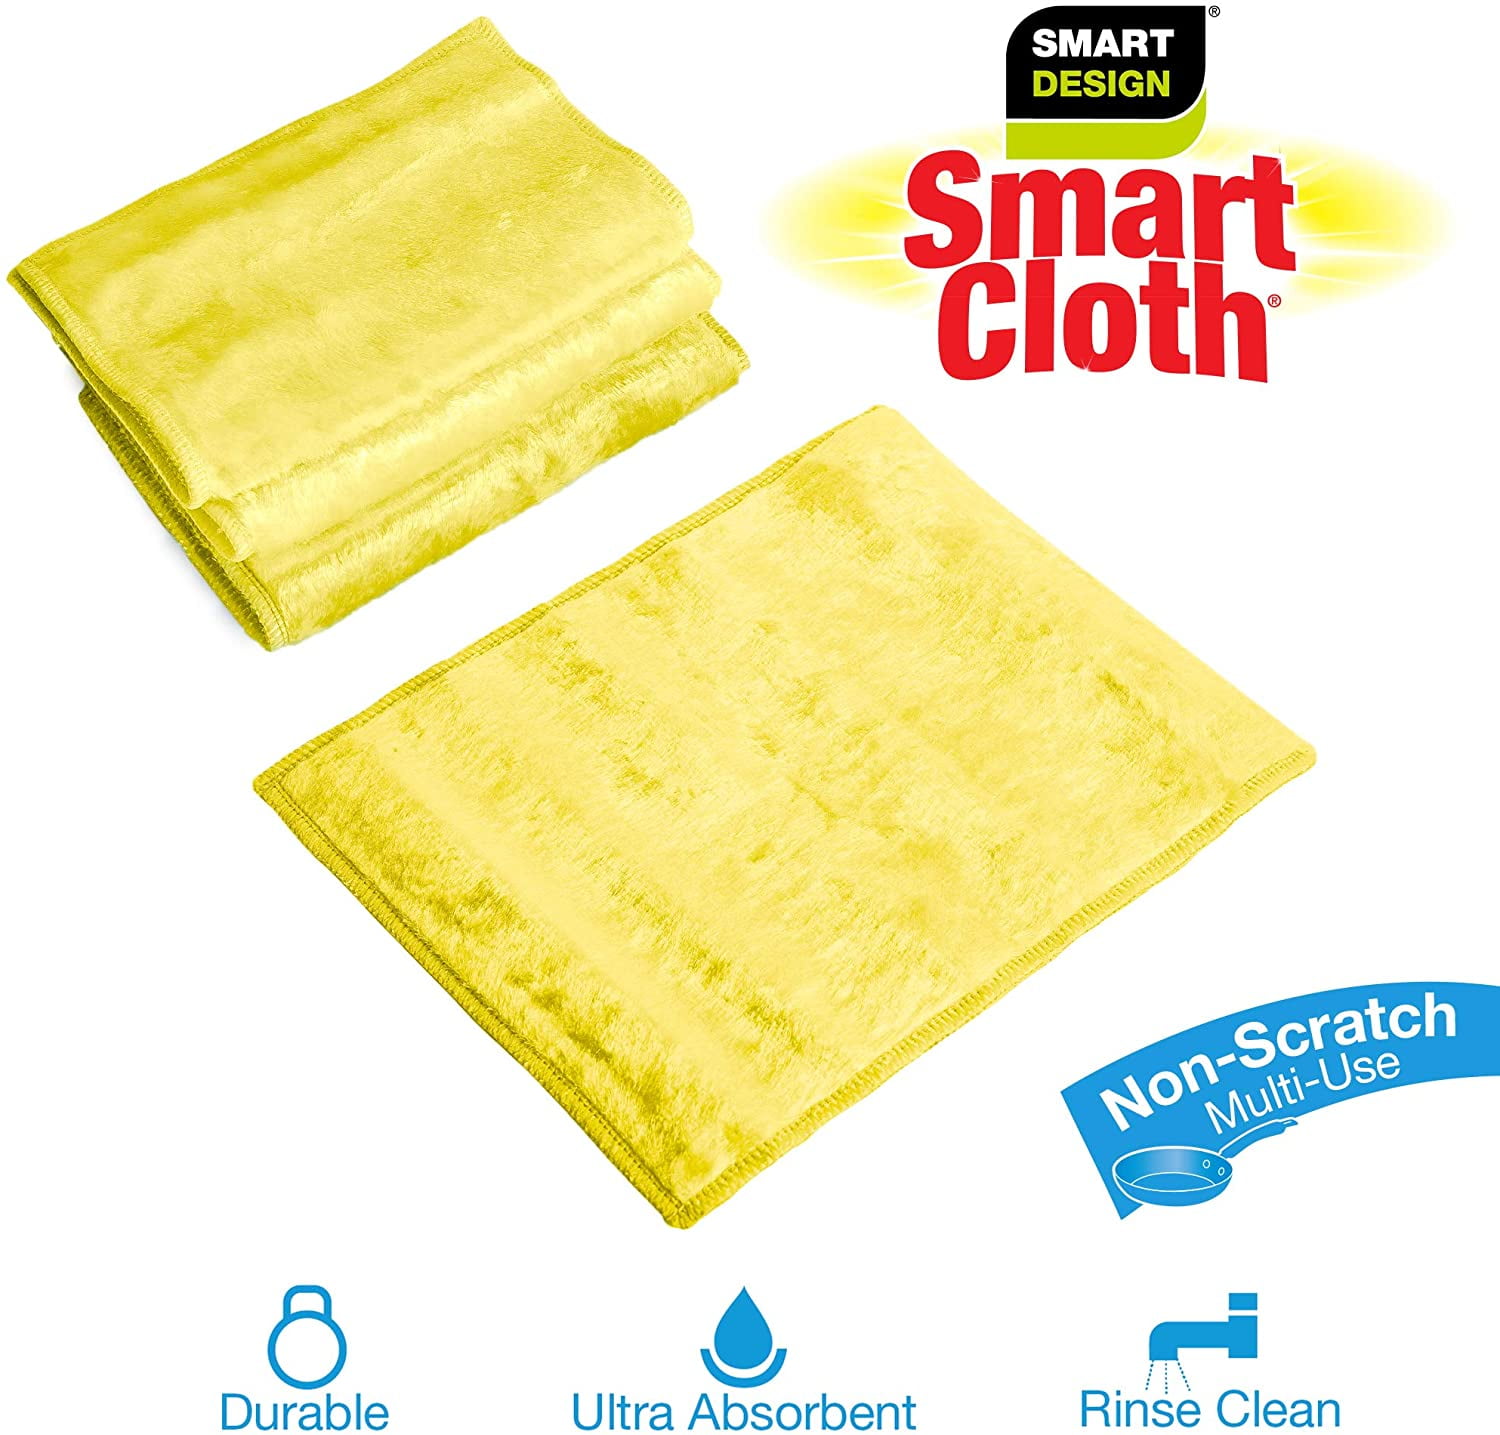 Smart Cloth with Odorless Rayon Fibers | Smart Design Cleaning Yellow, Green, Blue / 3